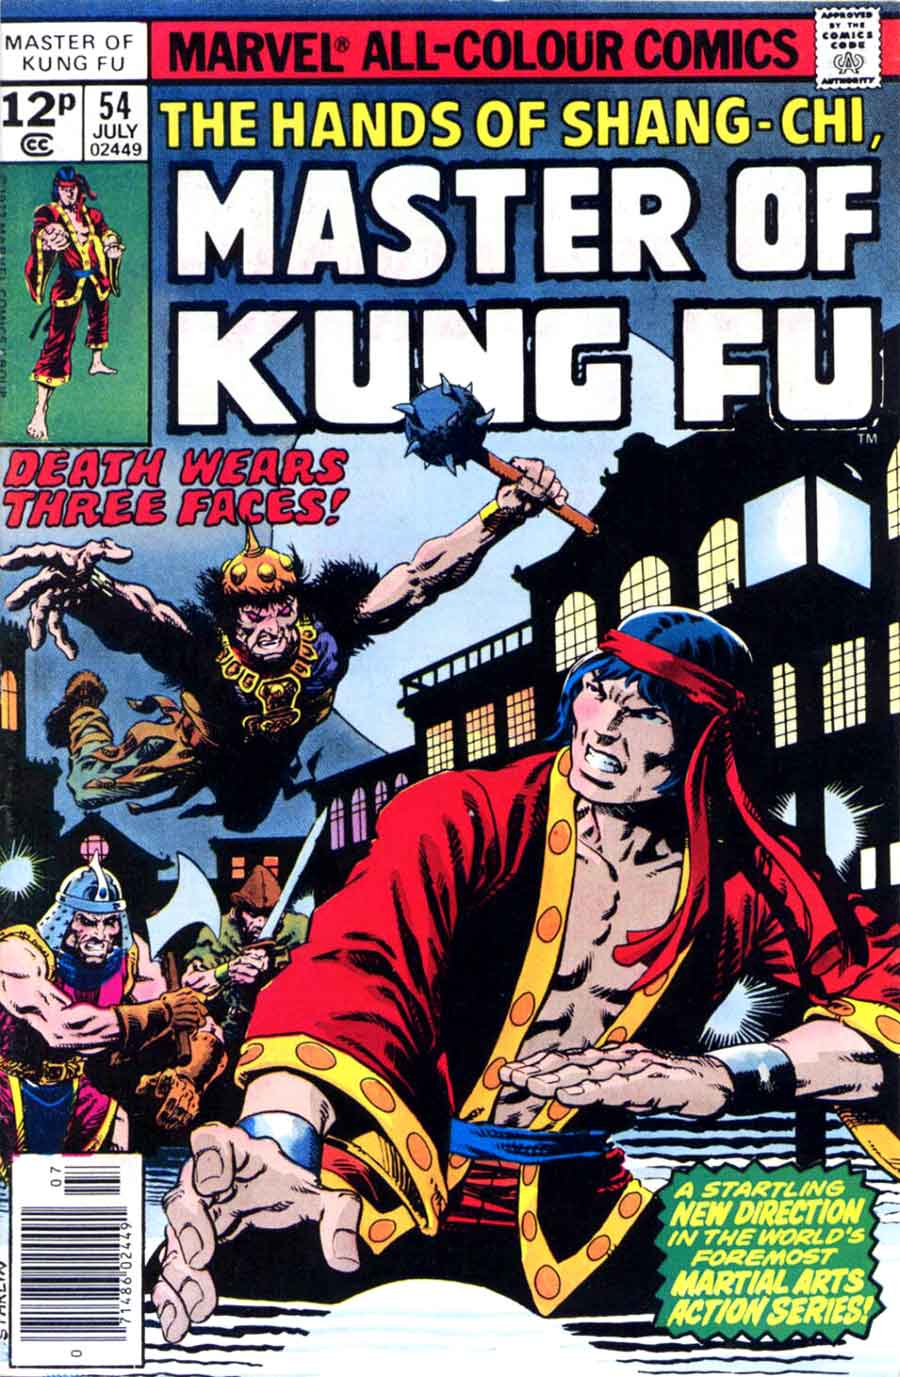 Master of Kung Fu v1 #54 marvel 1970s bronze age comic book cover art by Jim Starlin